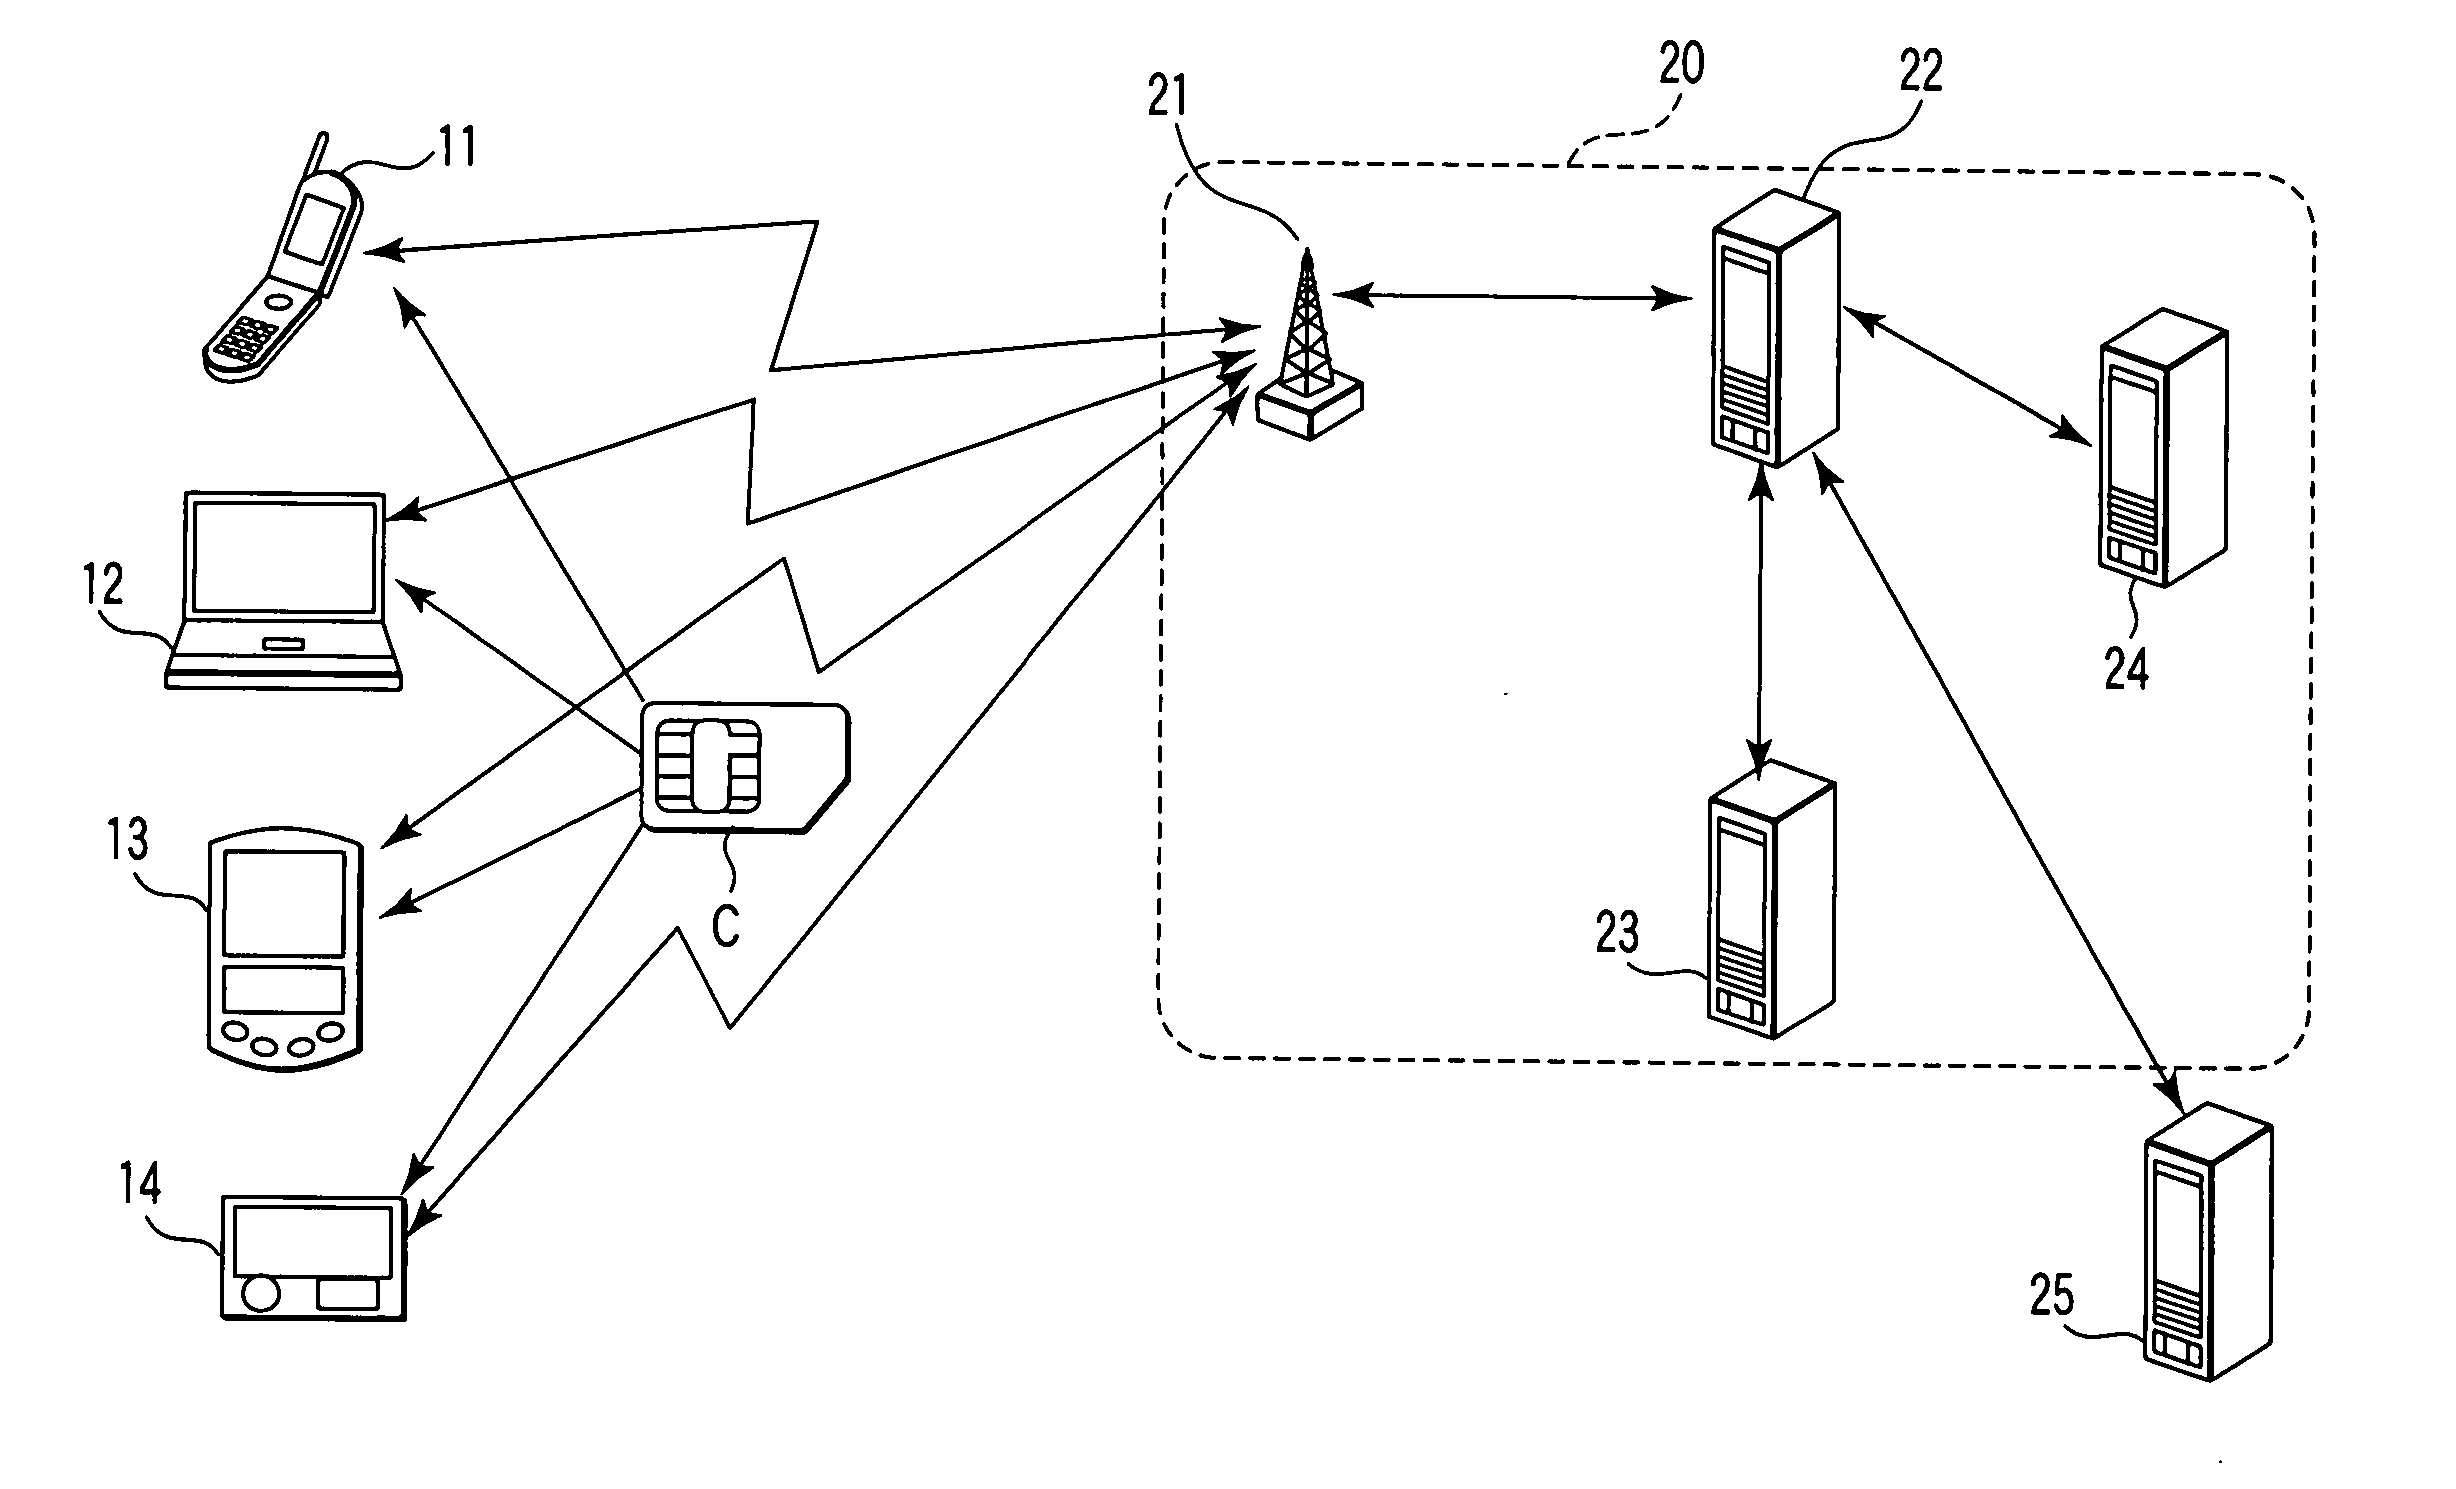 Electronic device mounted on terminal equipment